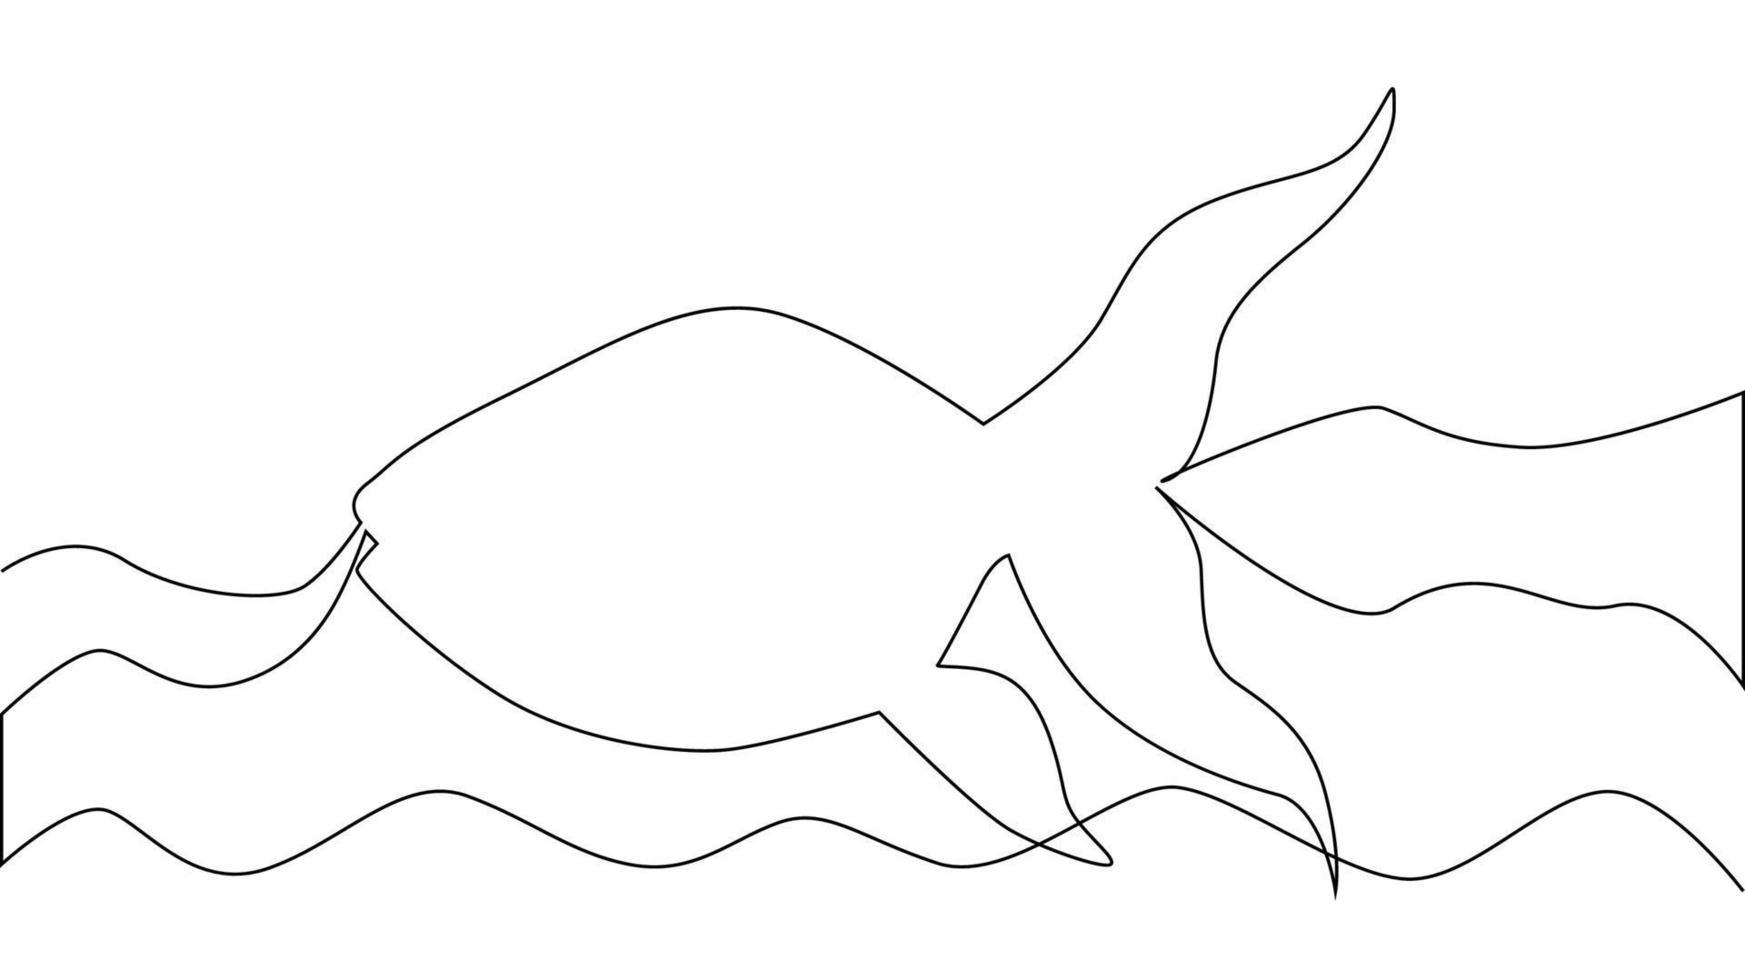 Continuous line drawing fish and waves. vector